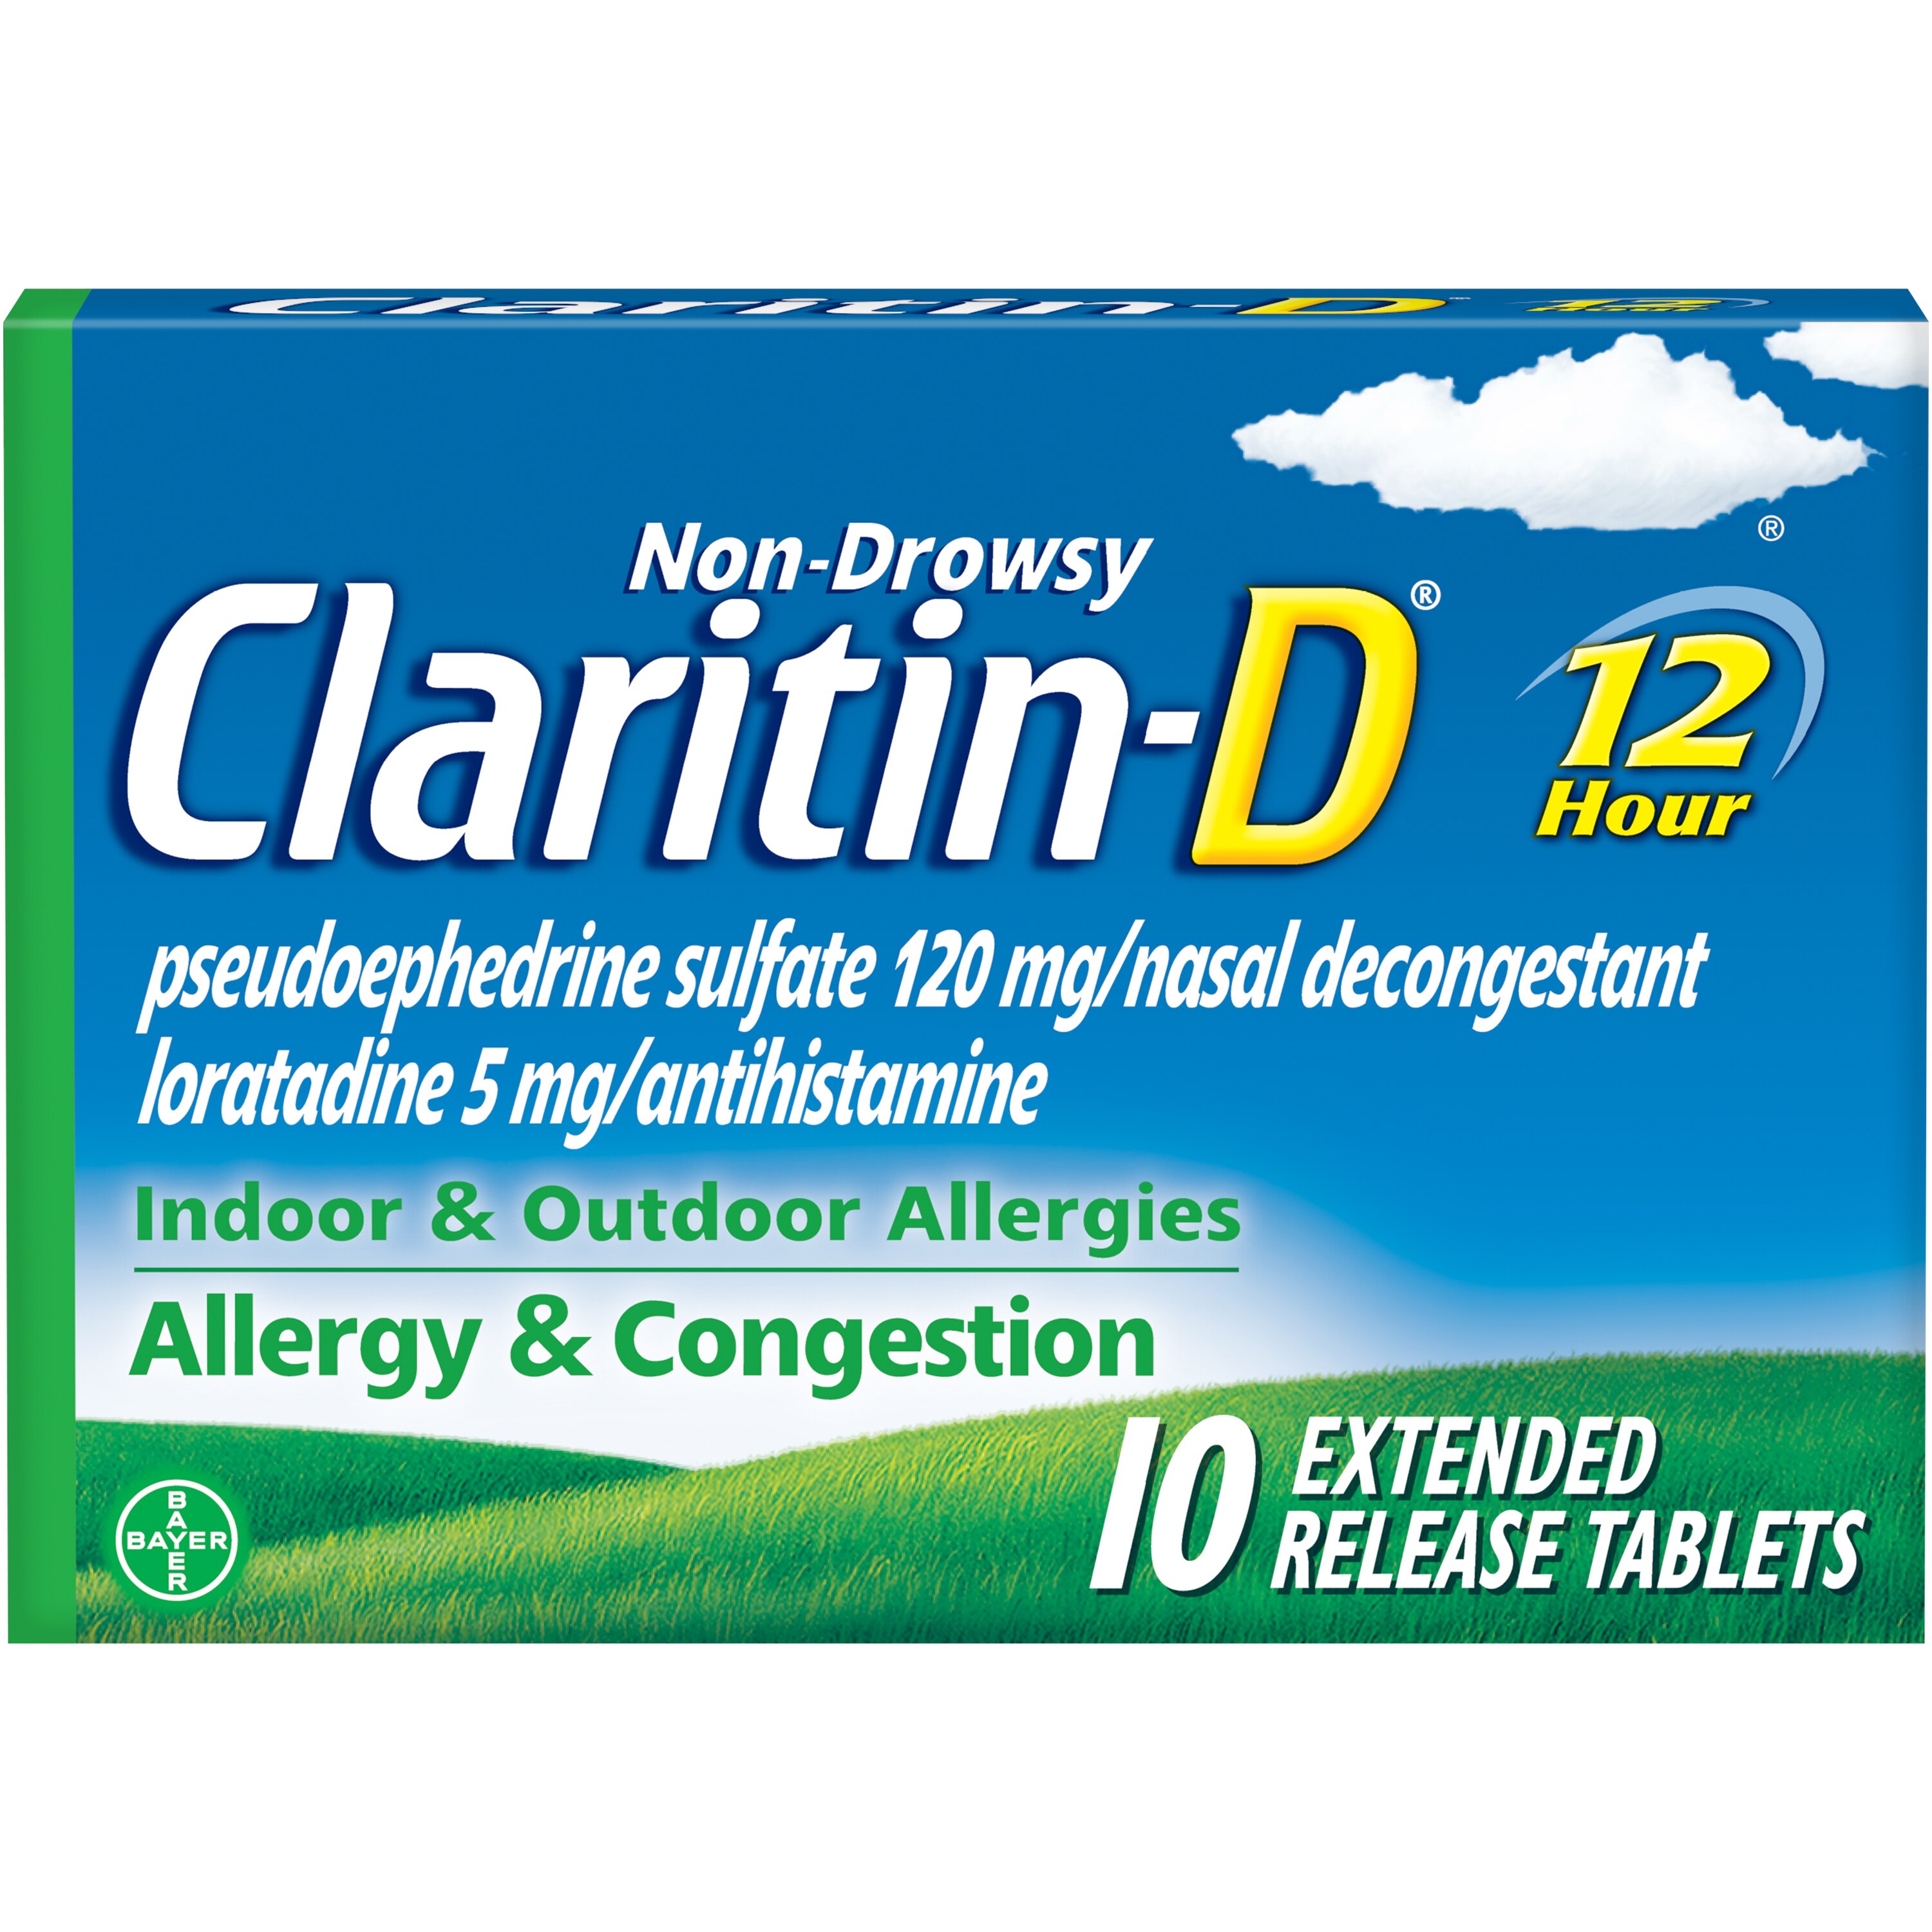 Claritin-D 12 Hour Non-Drowsy Indoor & Outdoor Allergies, Allergy & Congestion Extended Release Tablets